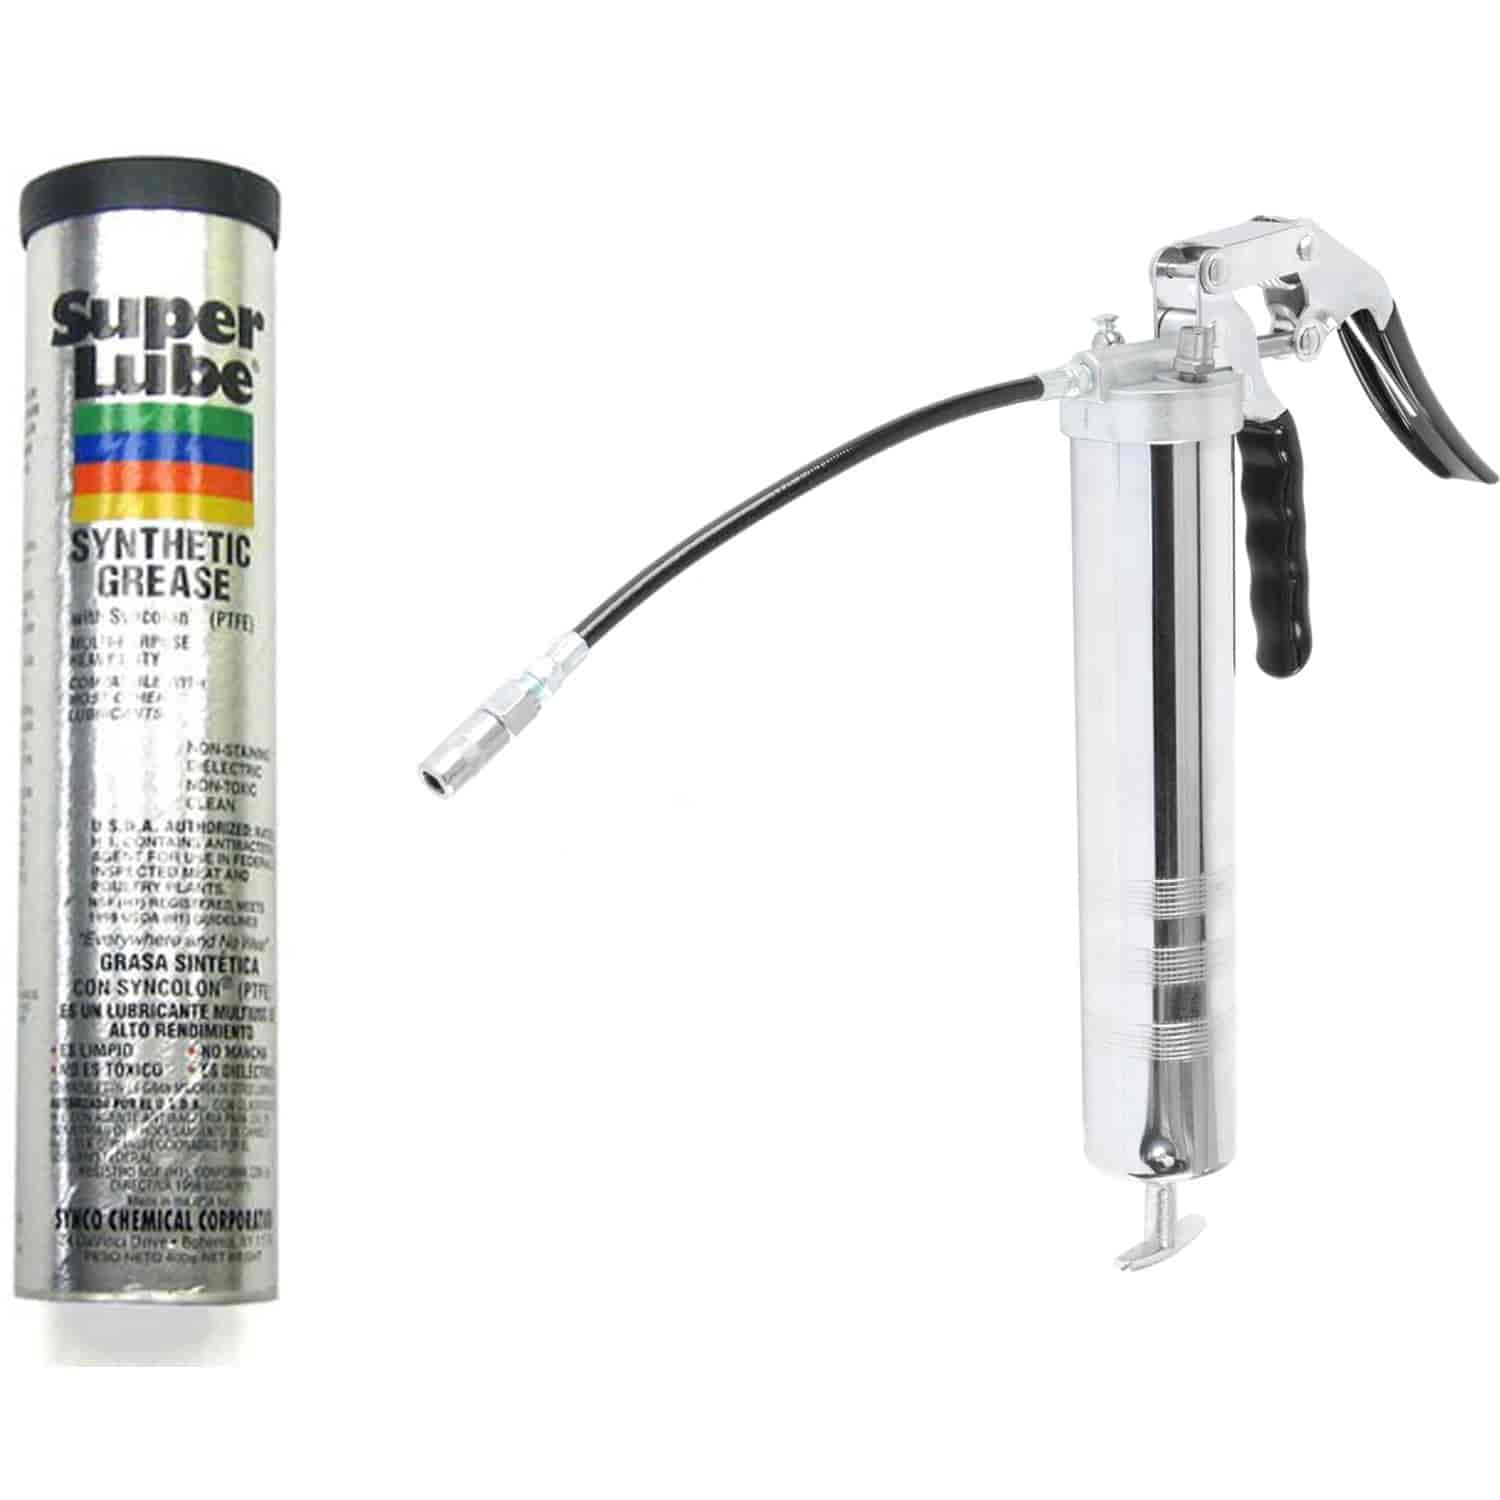 JEGS 81018K2: UMI Performance Super Lube Synthetic Grease and Gun Kit - JEGS